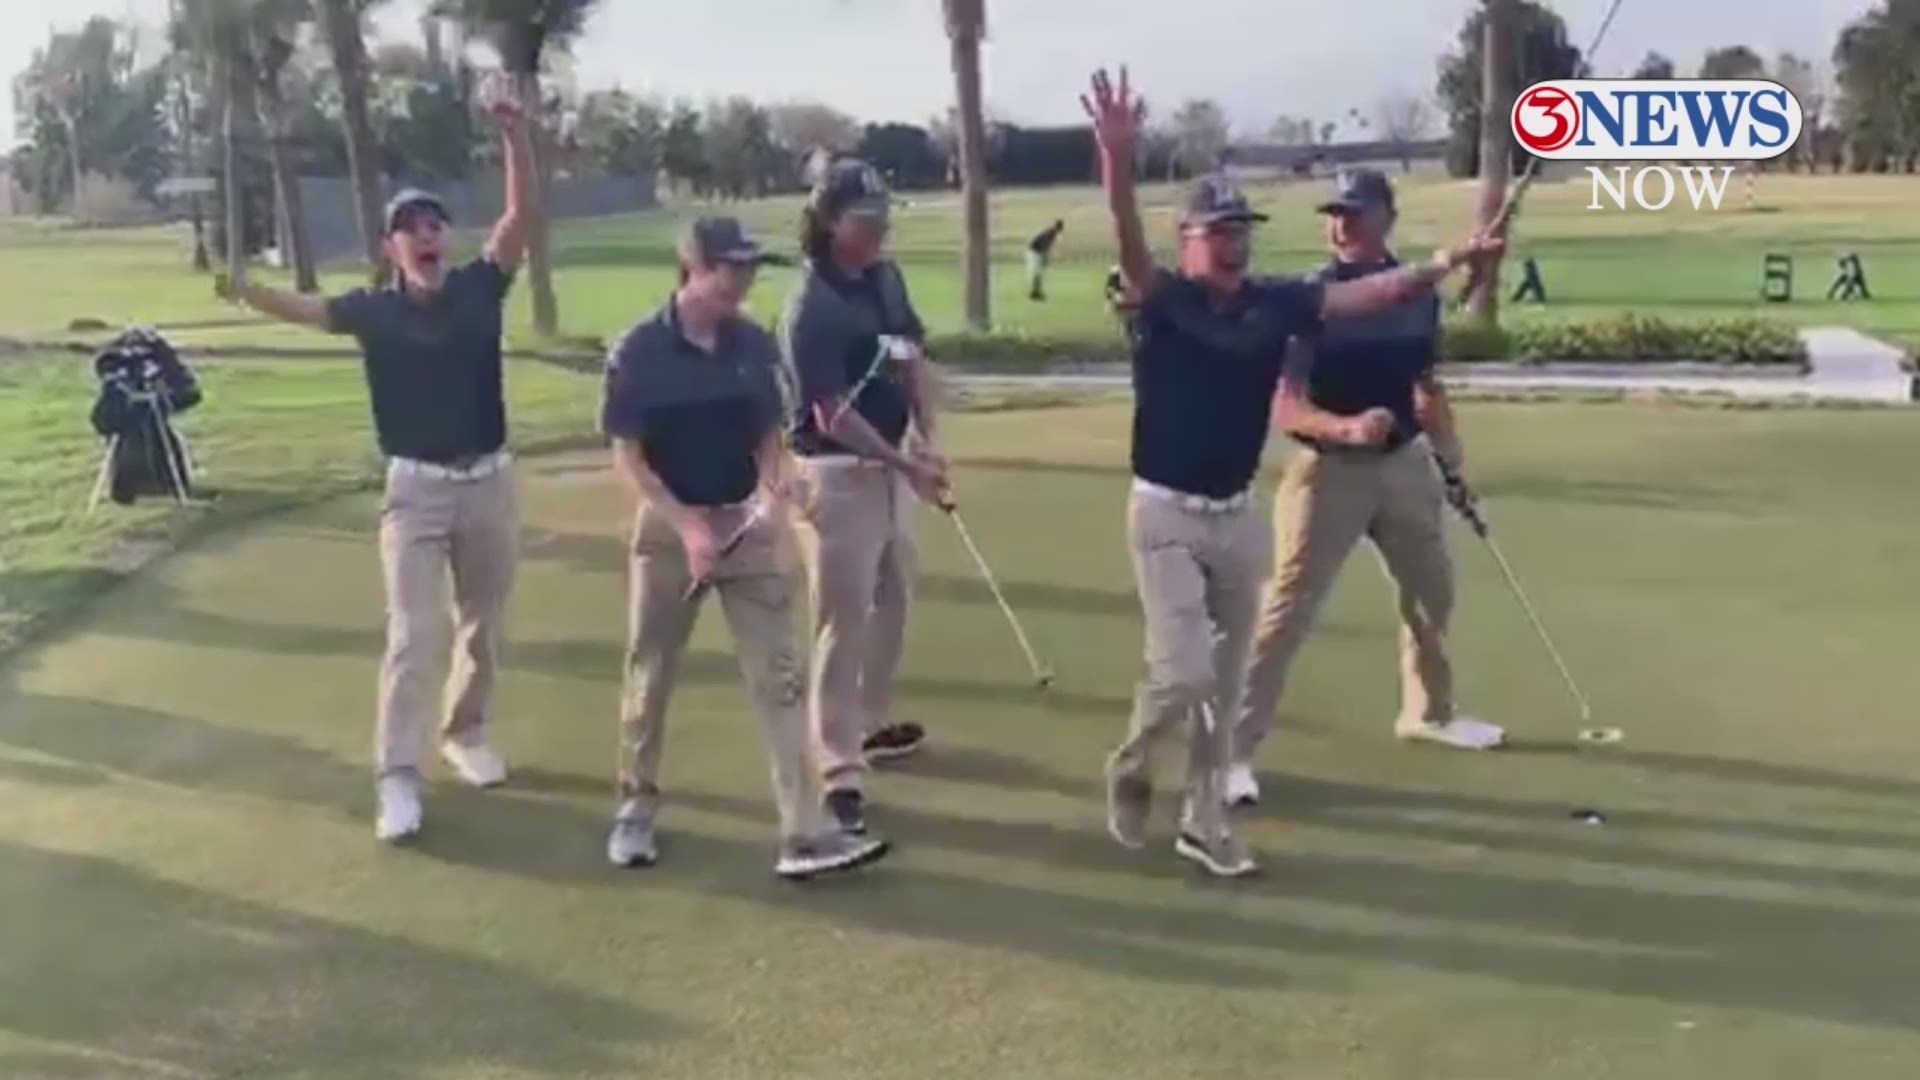 Members of the Veterans Memorial High School golf team in Corpus Christi landed this trick shot last week during a tournament in Los Fresnos, Texas.